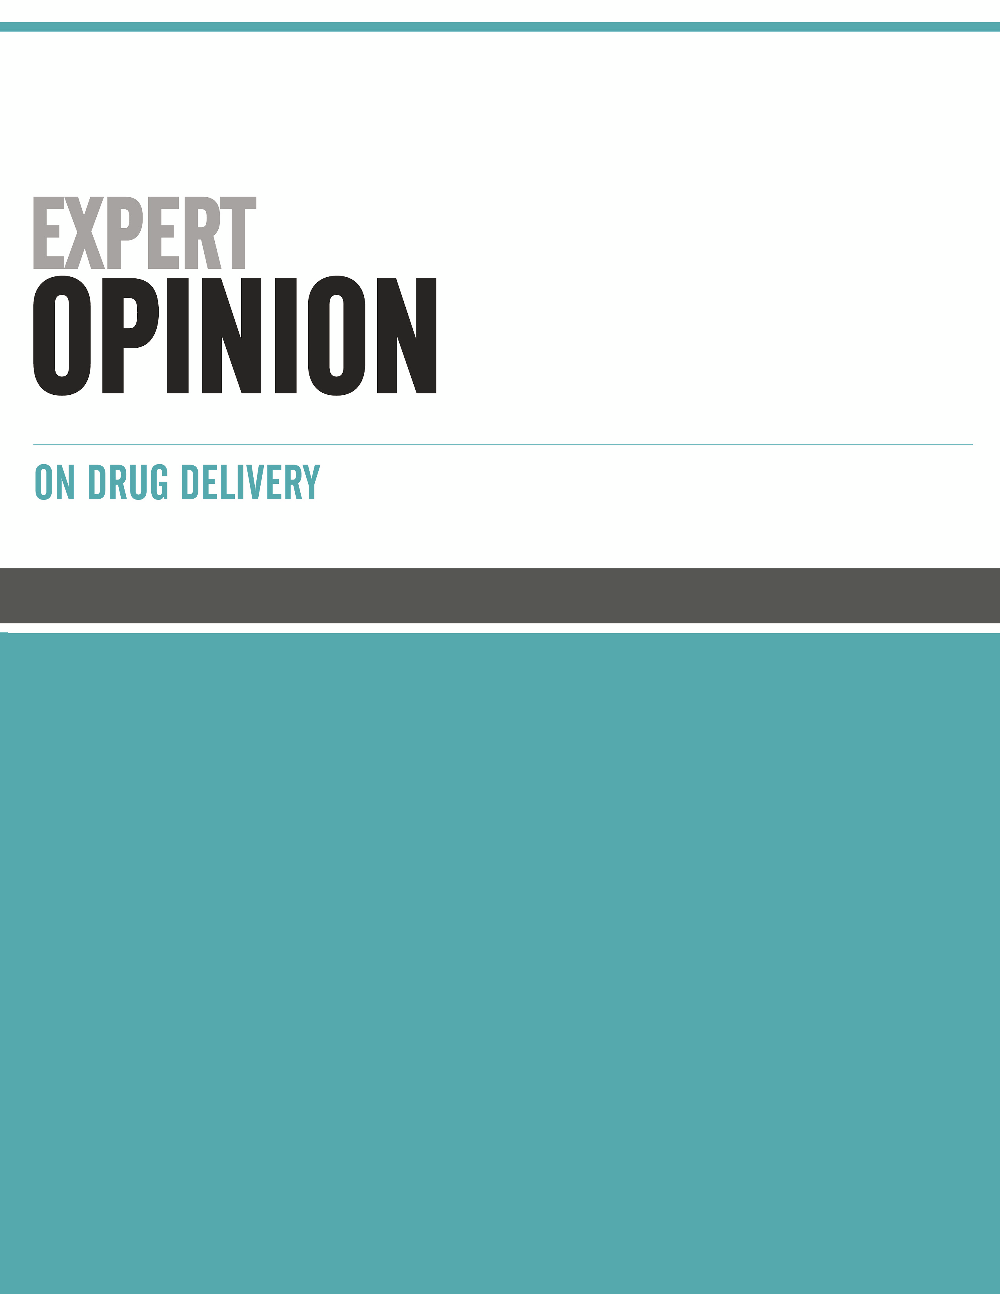 Expert Opinion on Drug Delivery journal